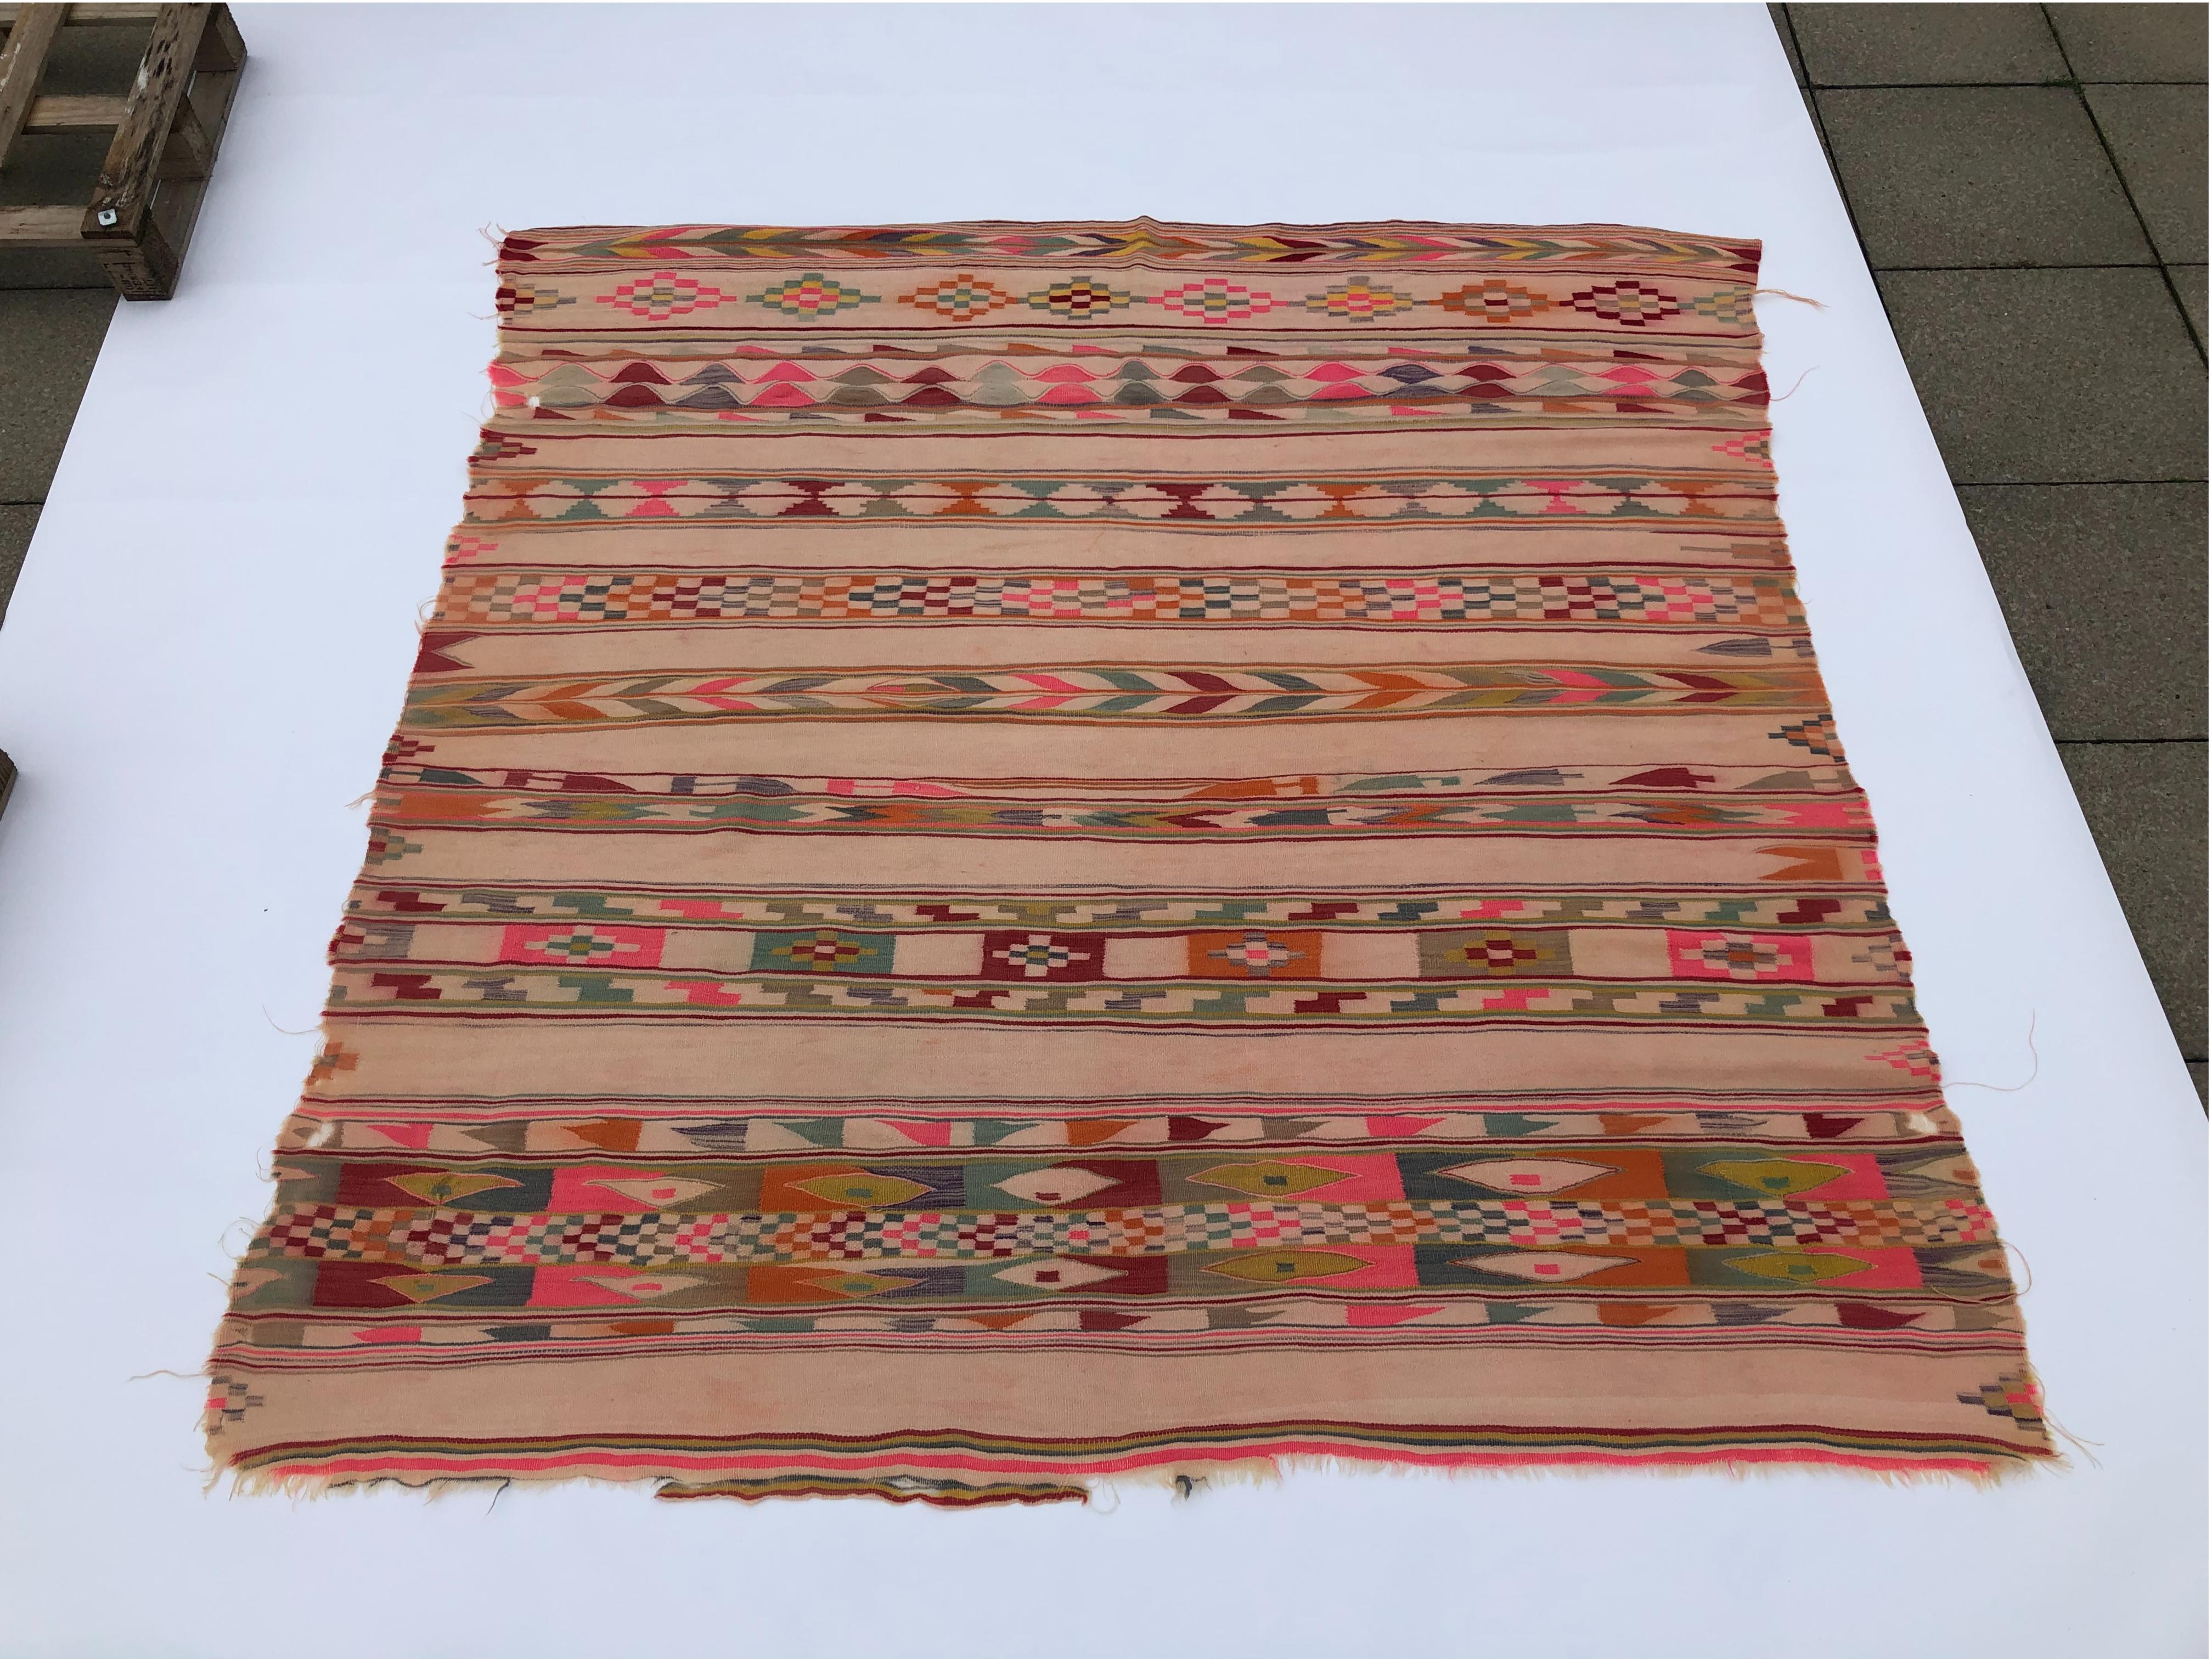 Discover a piece of history with this vintage Berber rug from 1930s Algeria, showcasing tribal geometrical patterns in groups of parallel lines.

The rug's dominant neon pink, burnt orange, brick red, and various green shades create a vibrant and